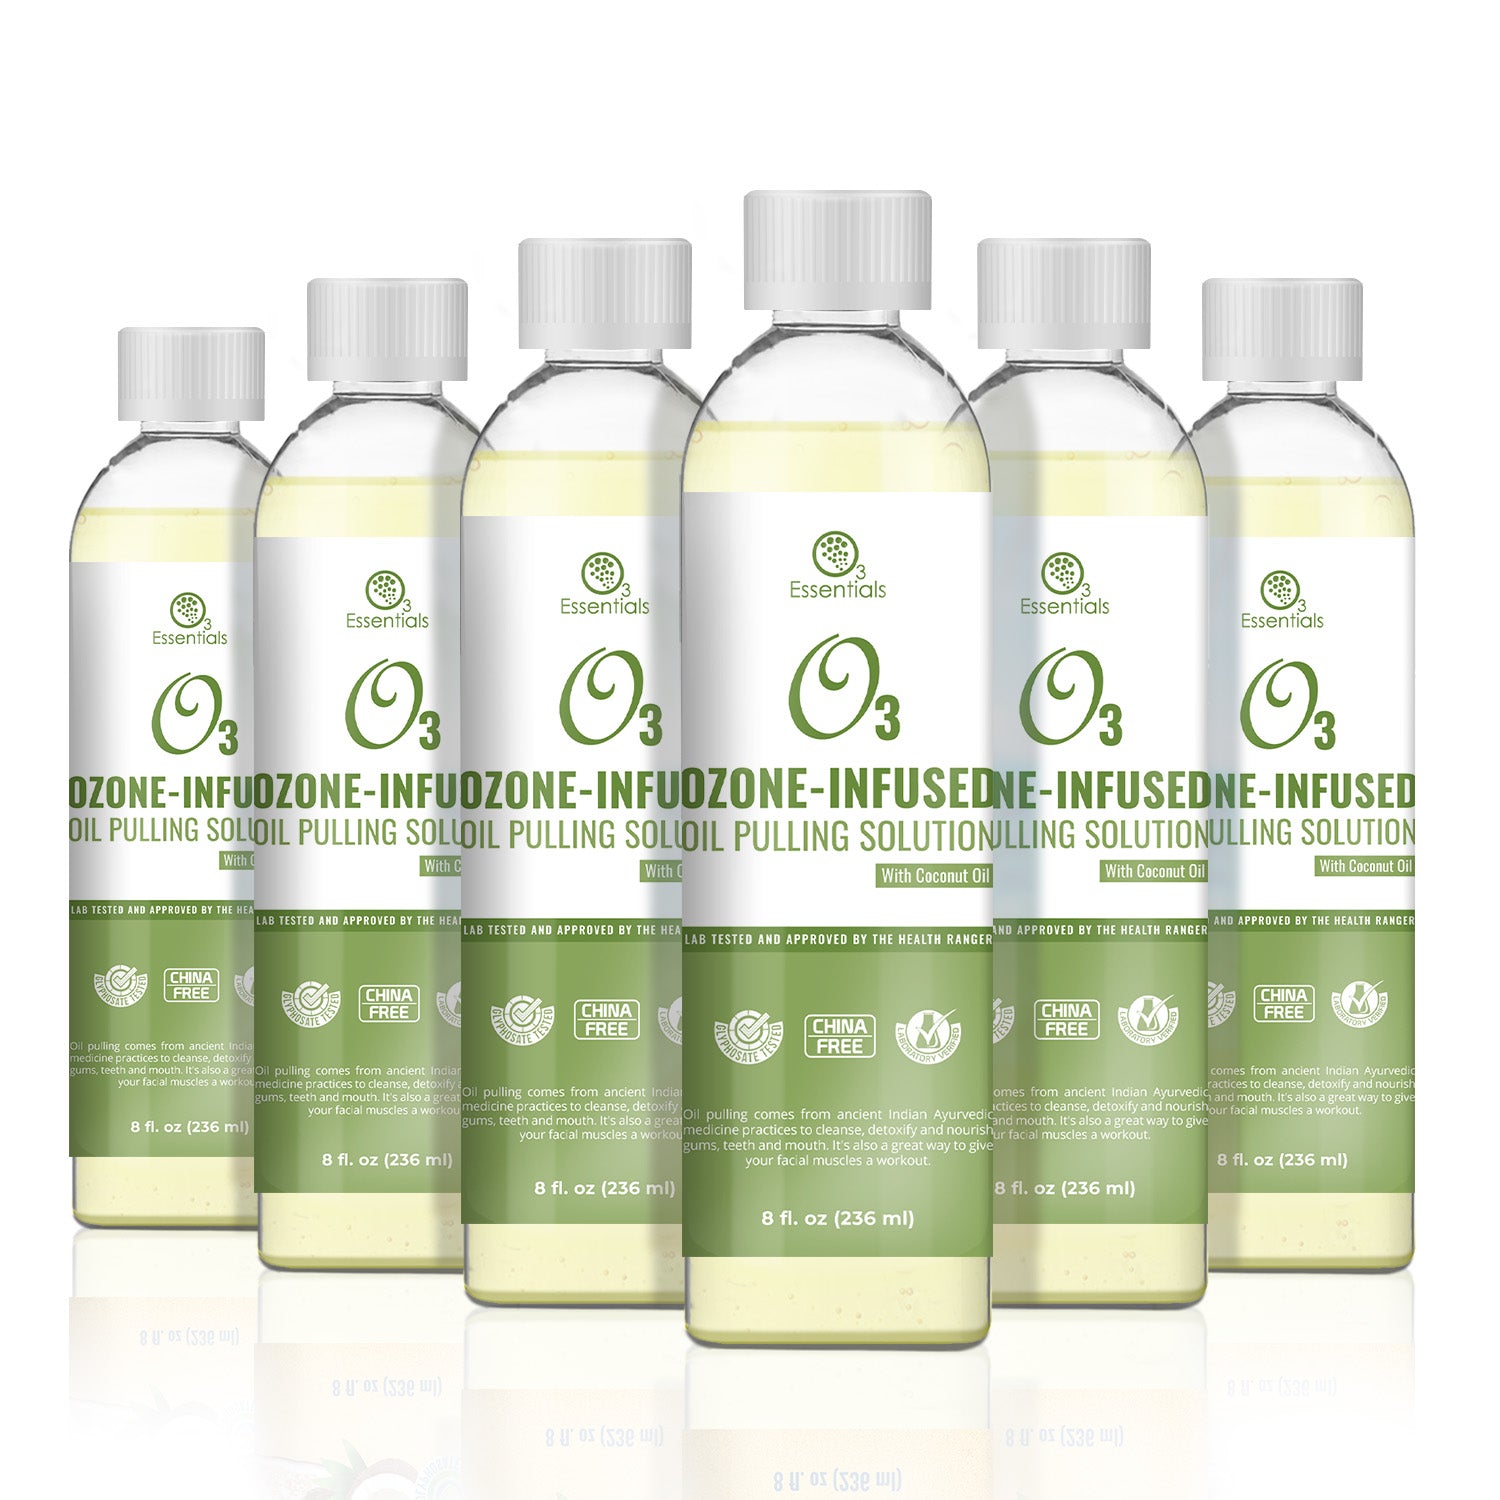 O3 Ozone-Infused Oil Pulling Solution 8oz (with Organic Coconut Oil and Organic Peppermint) (6-Pack)